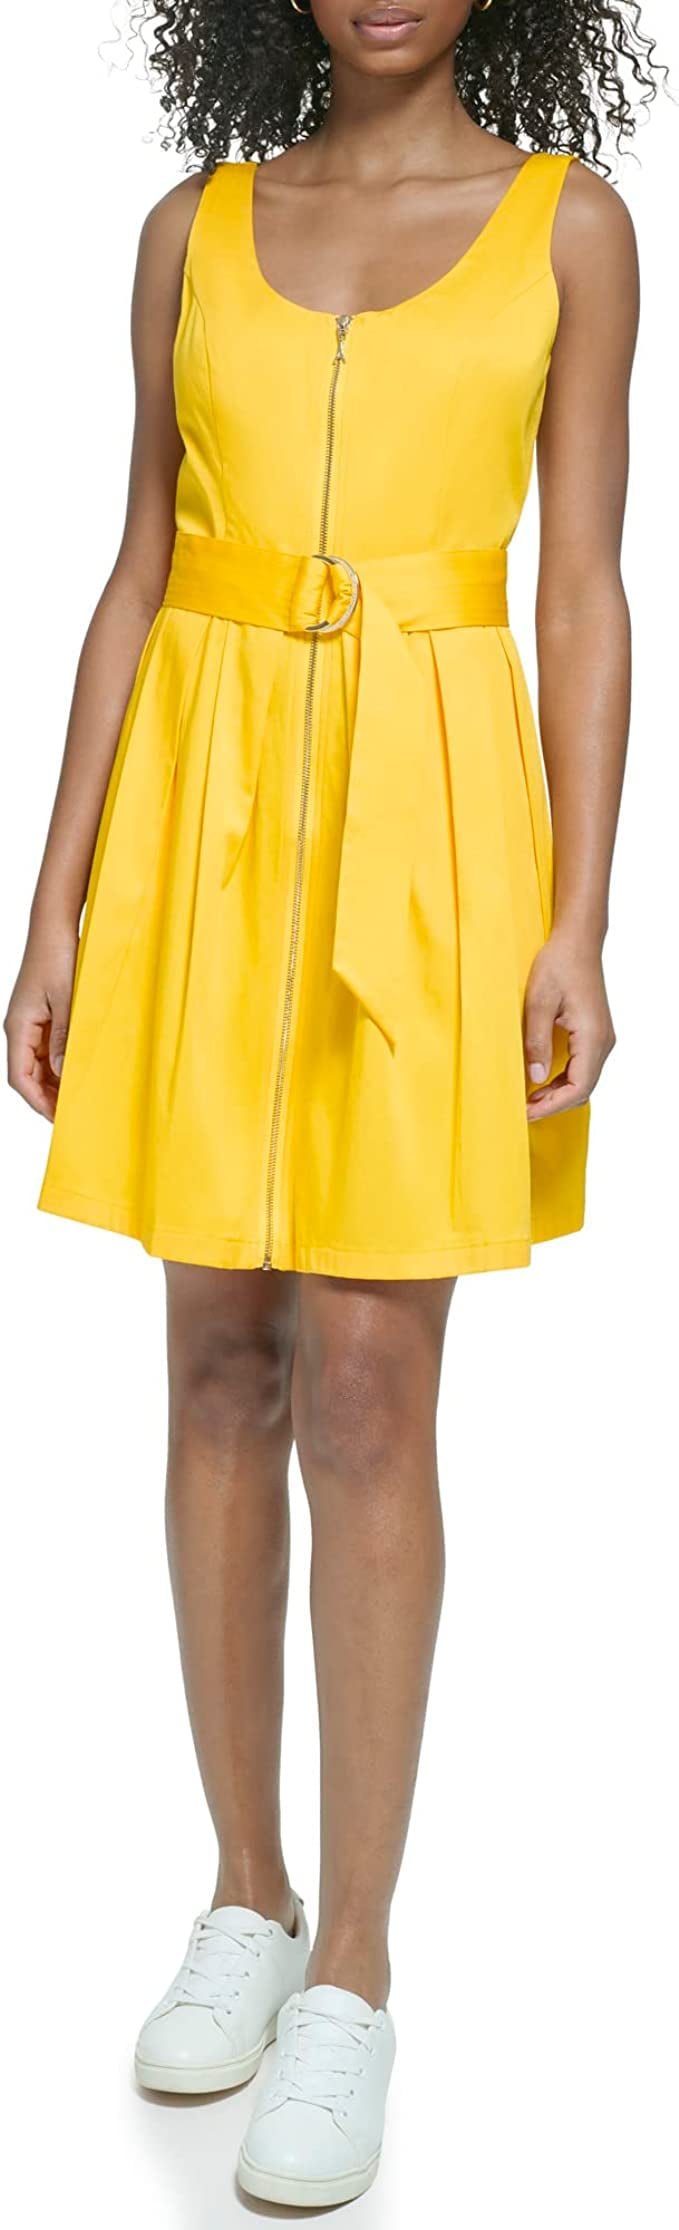 A Bright Yellow Sporty Dress From Karl Lagerfeld Paris